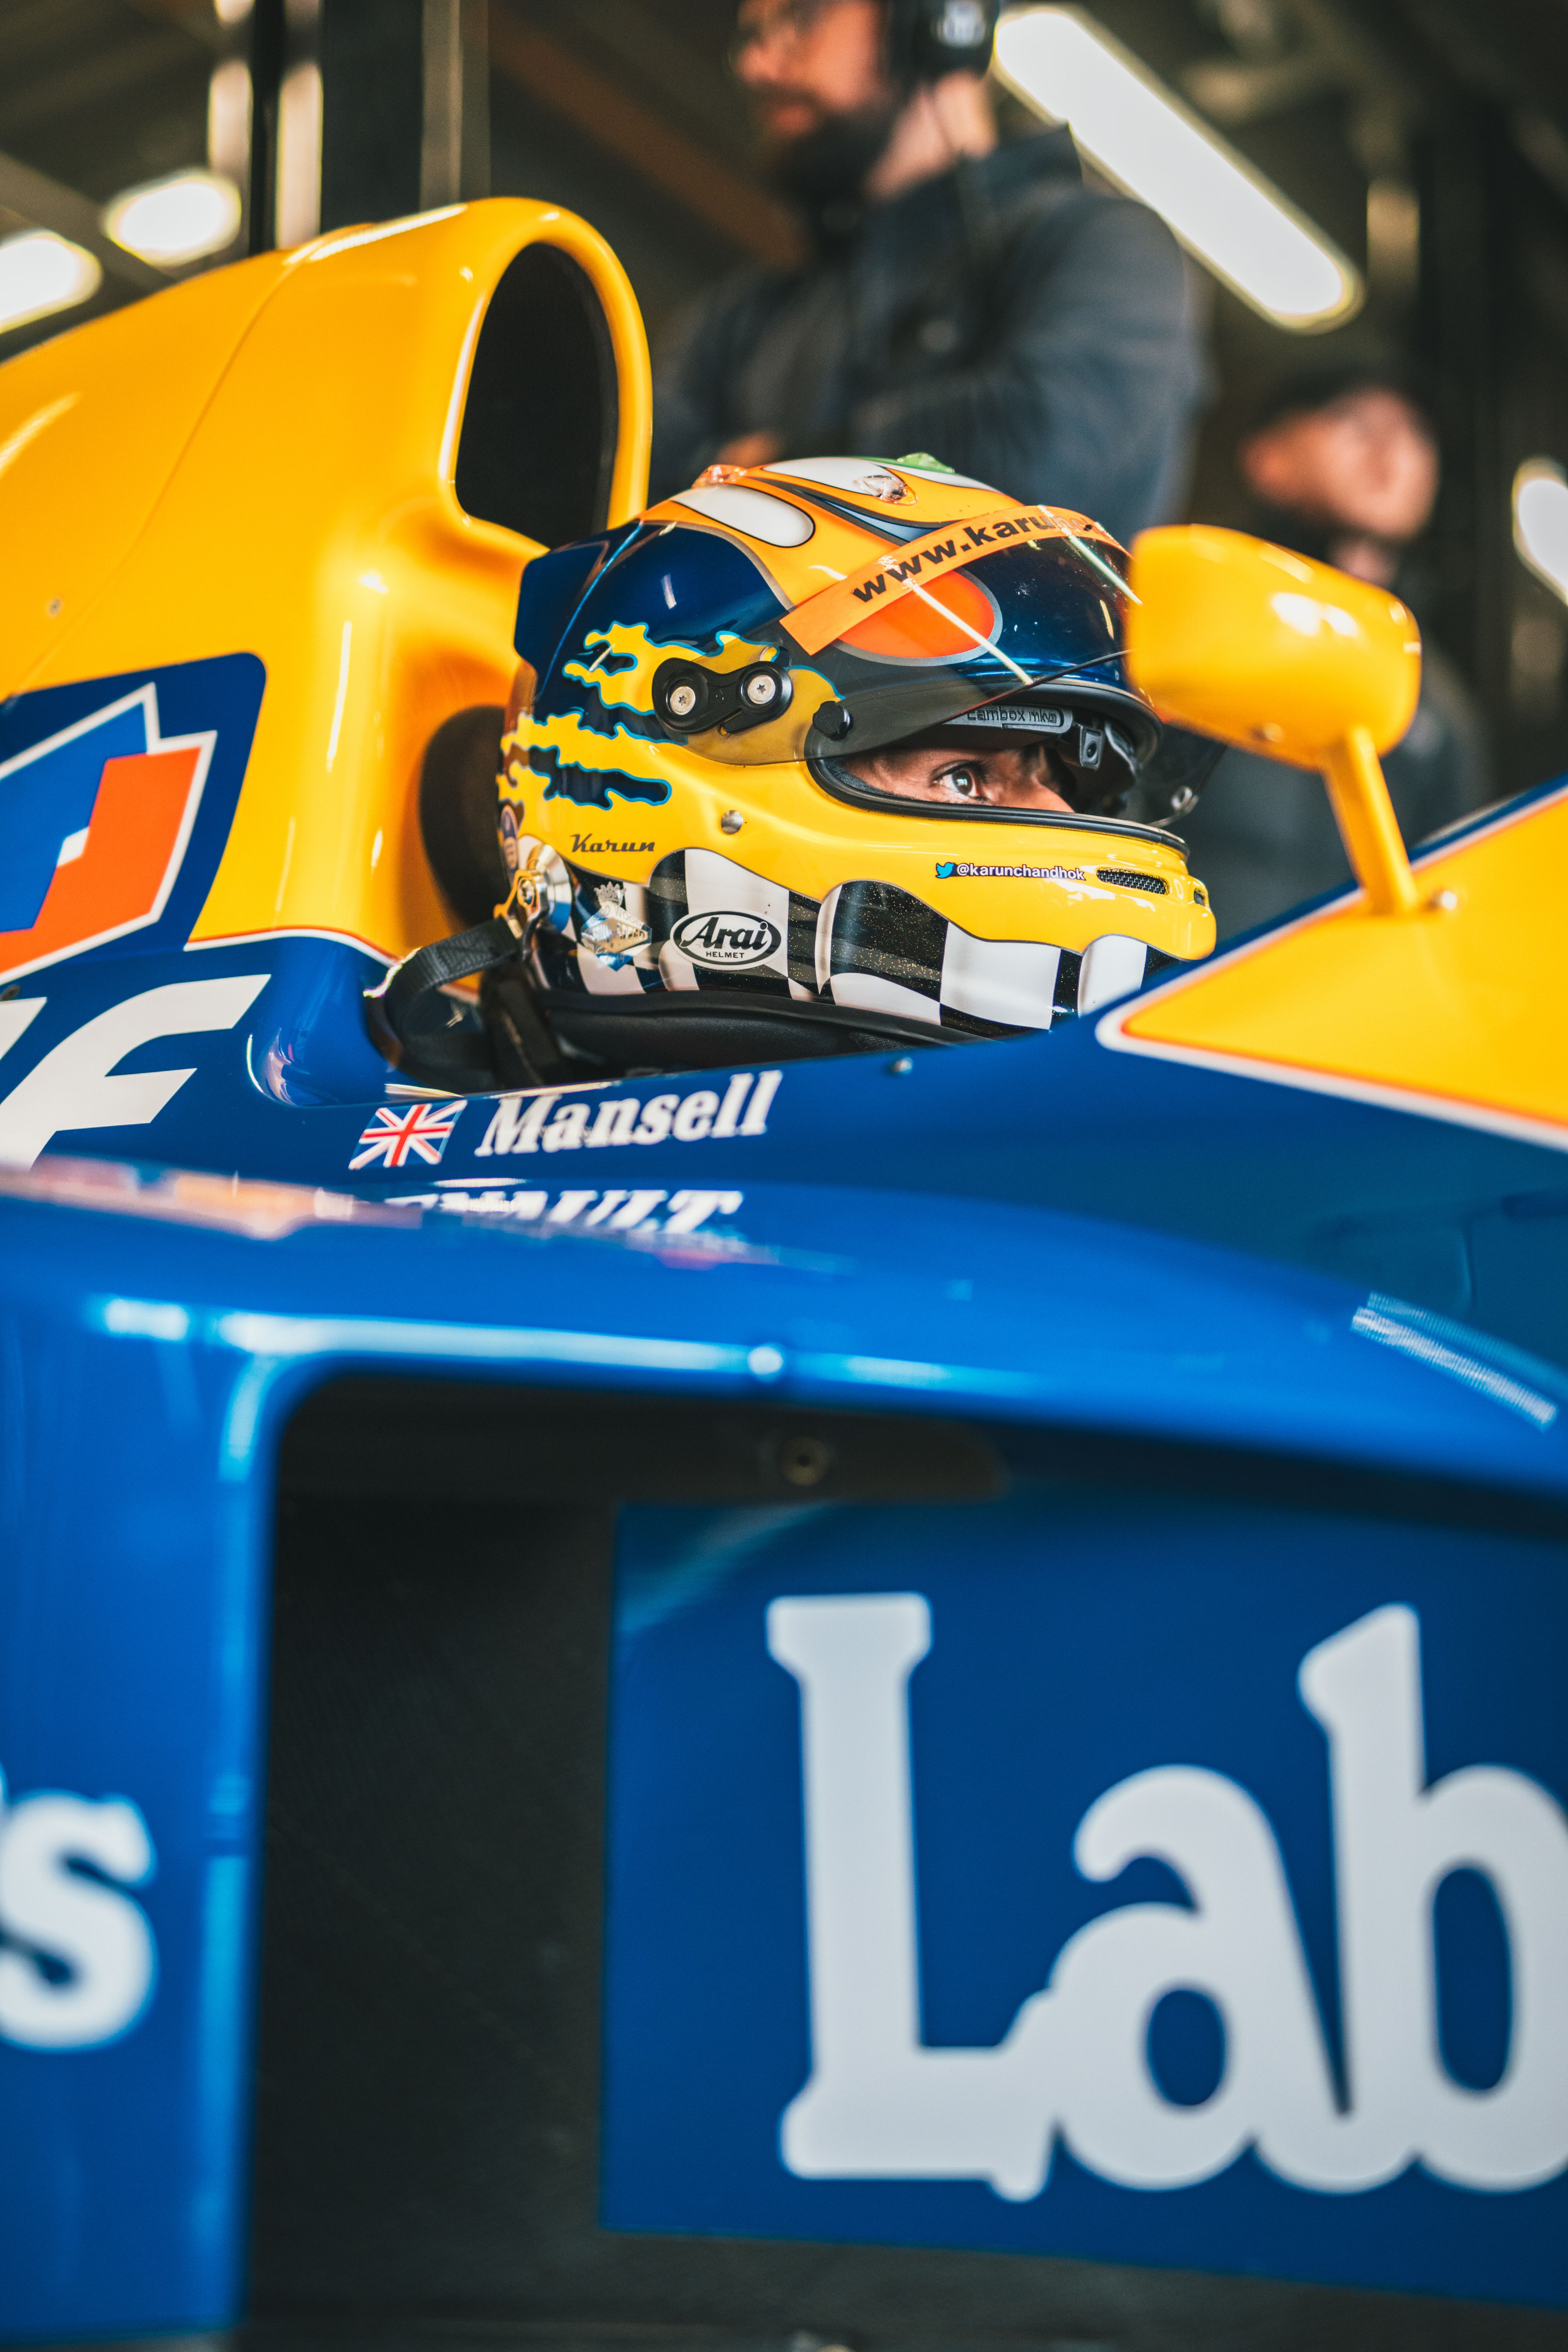 In Photos: Shaking down the FW14B | Williams Racing